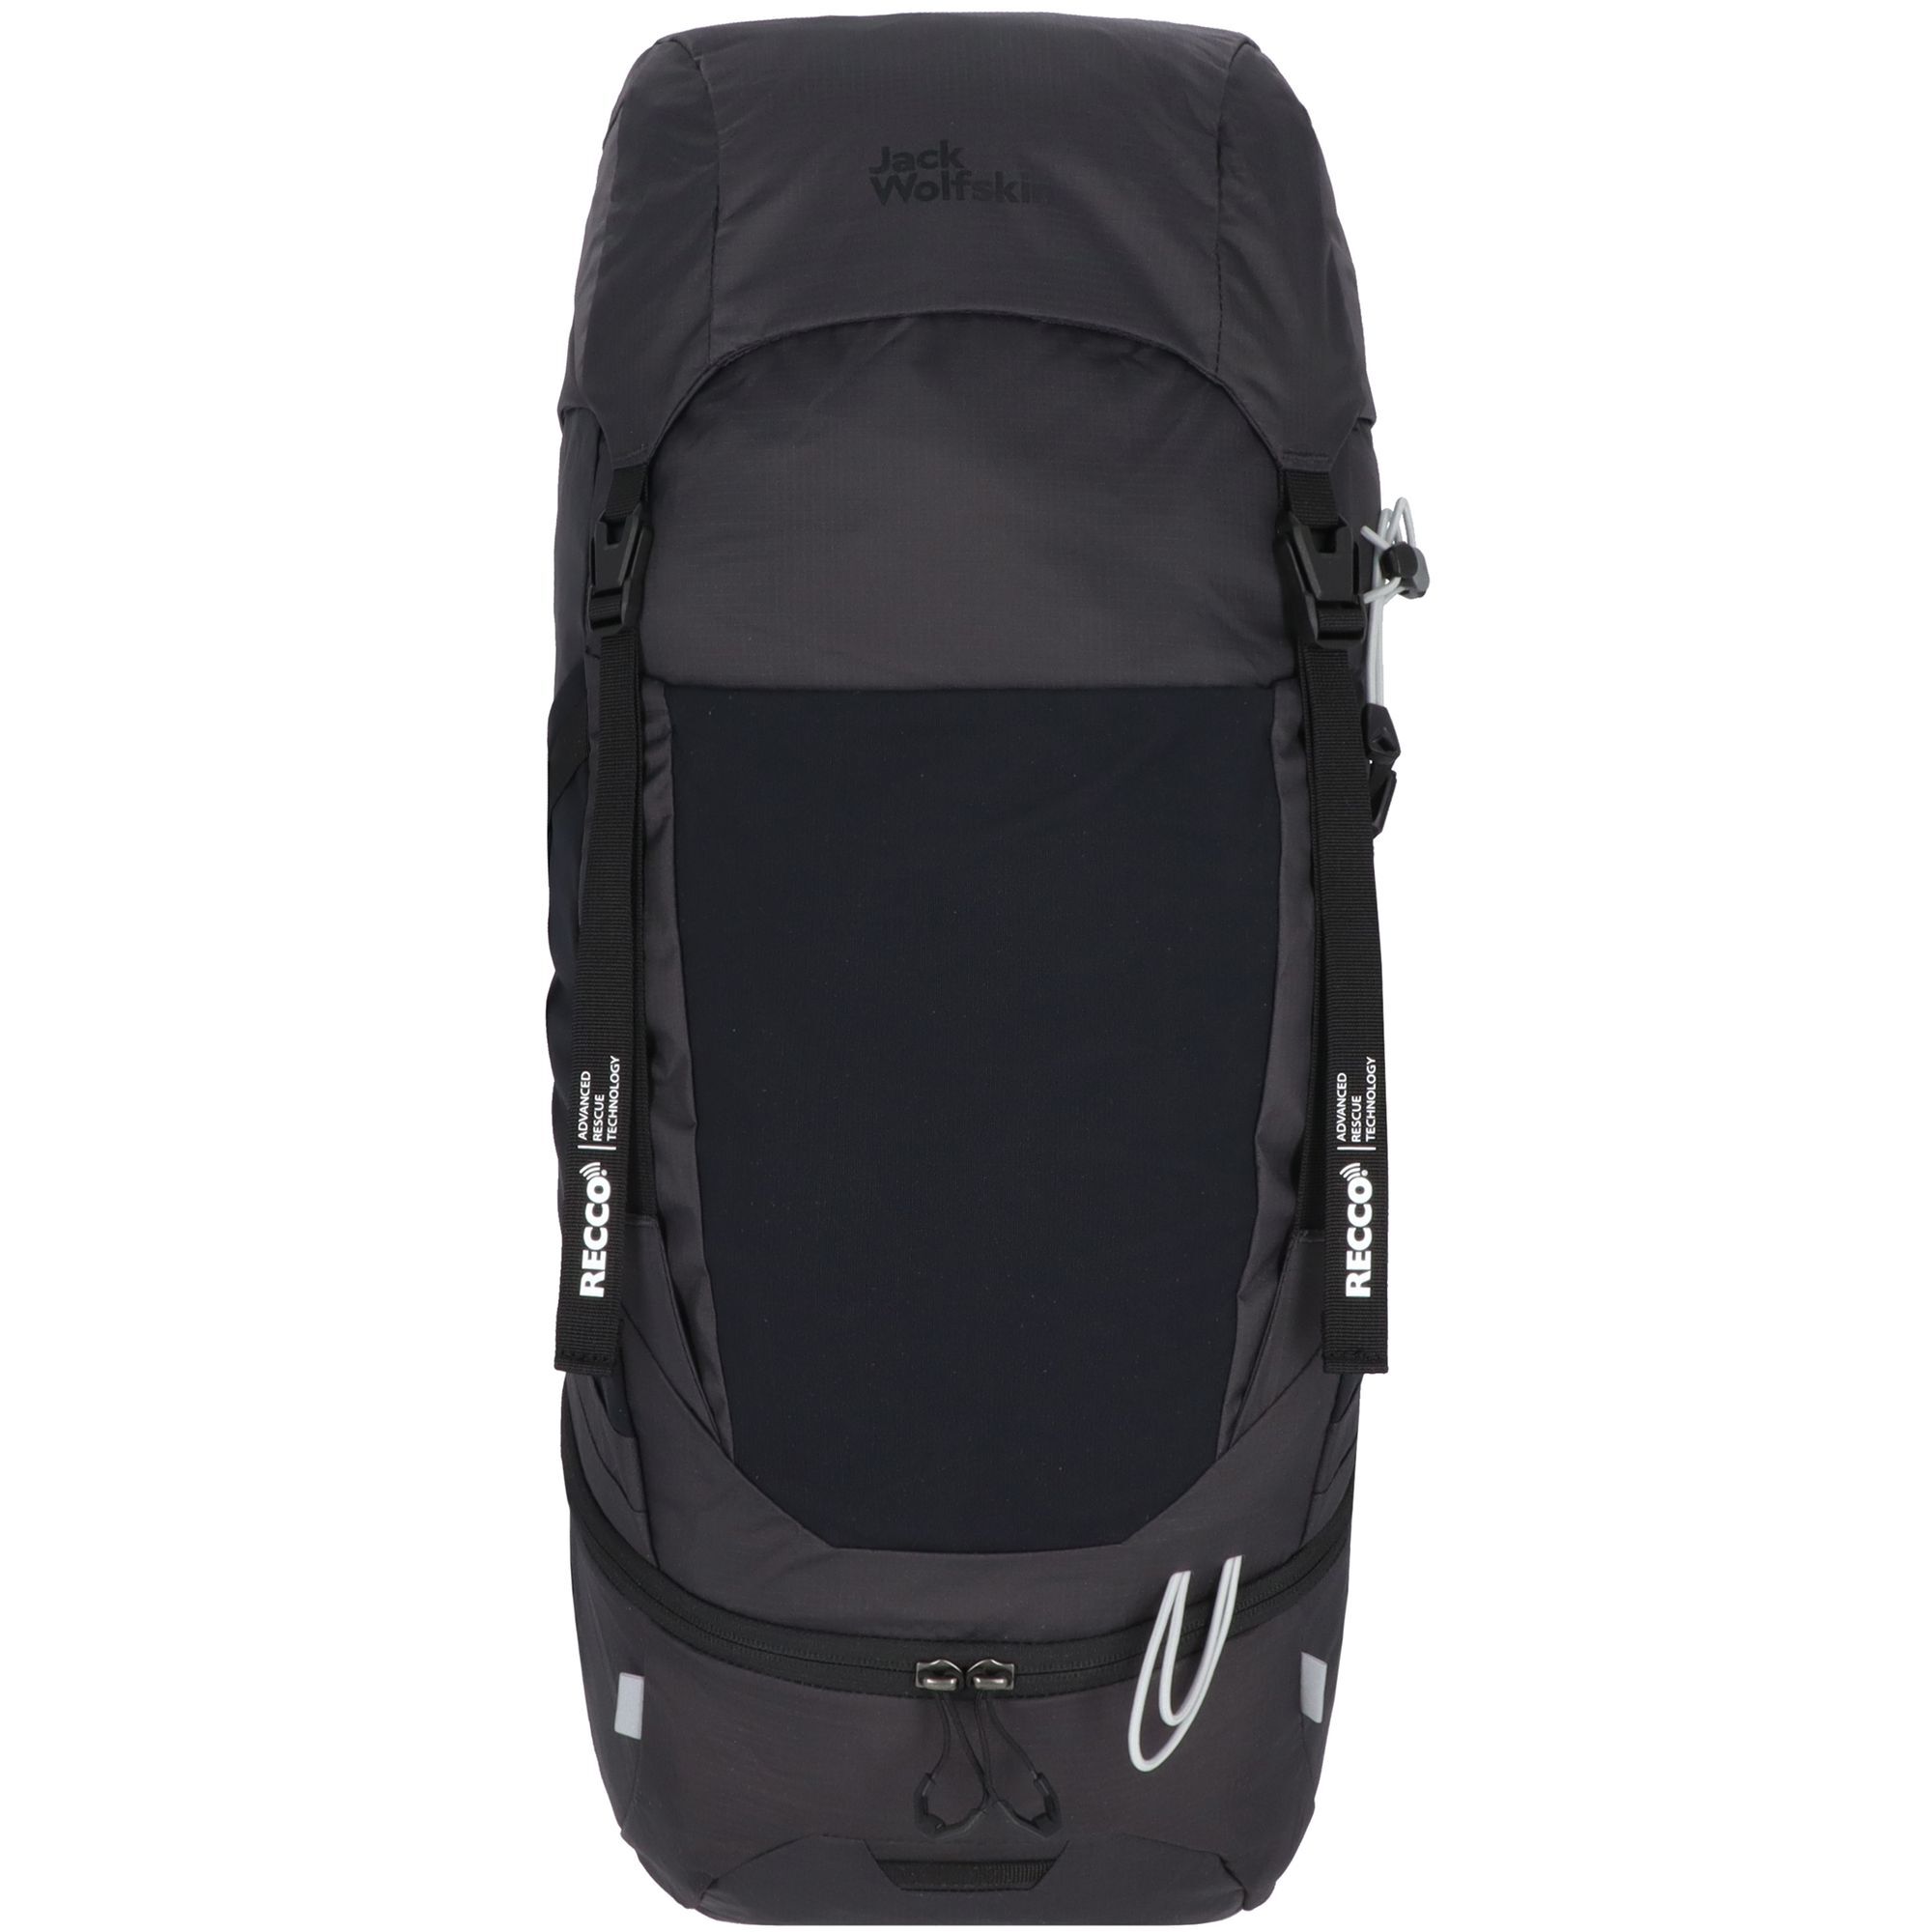 Рюкзак Jack Wolfskin Wolftrail 28 Recco 62 cm, цвет phantom рюкзак jack wolfskin kingston 30 pack recco